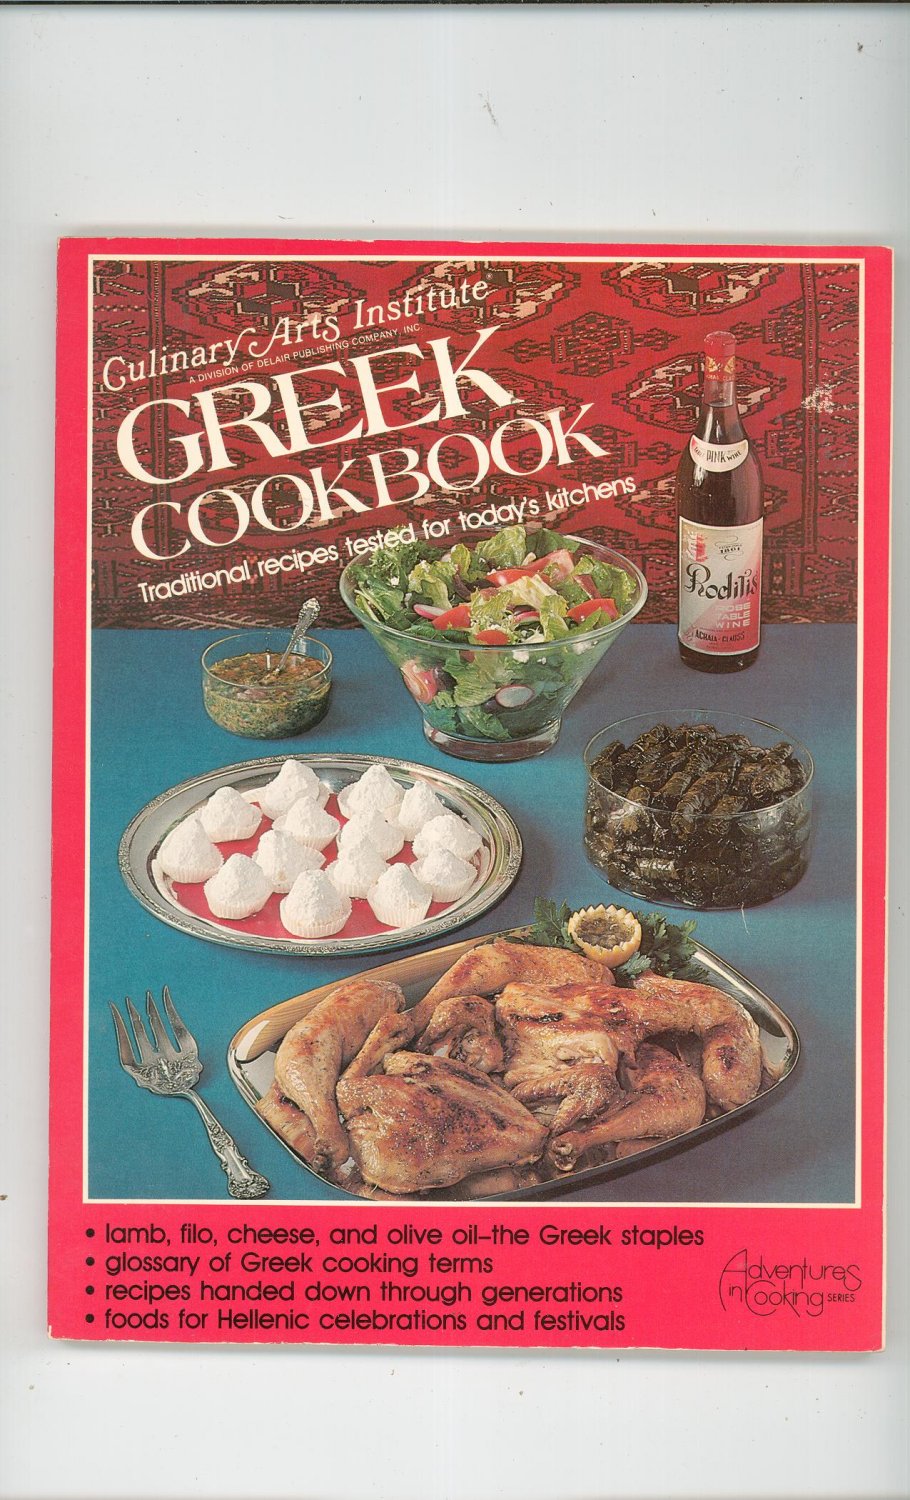 My Greek Traditional Cook Book 1 by Anna Othitis